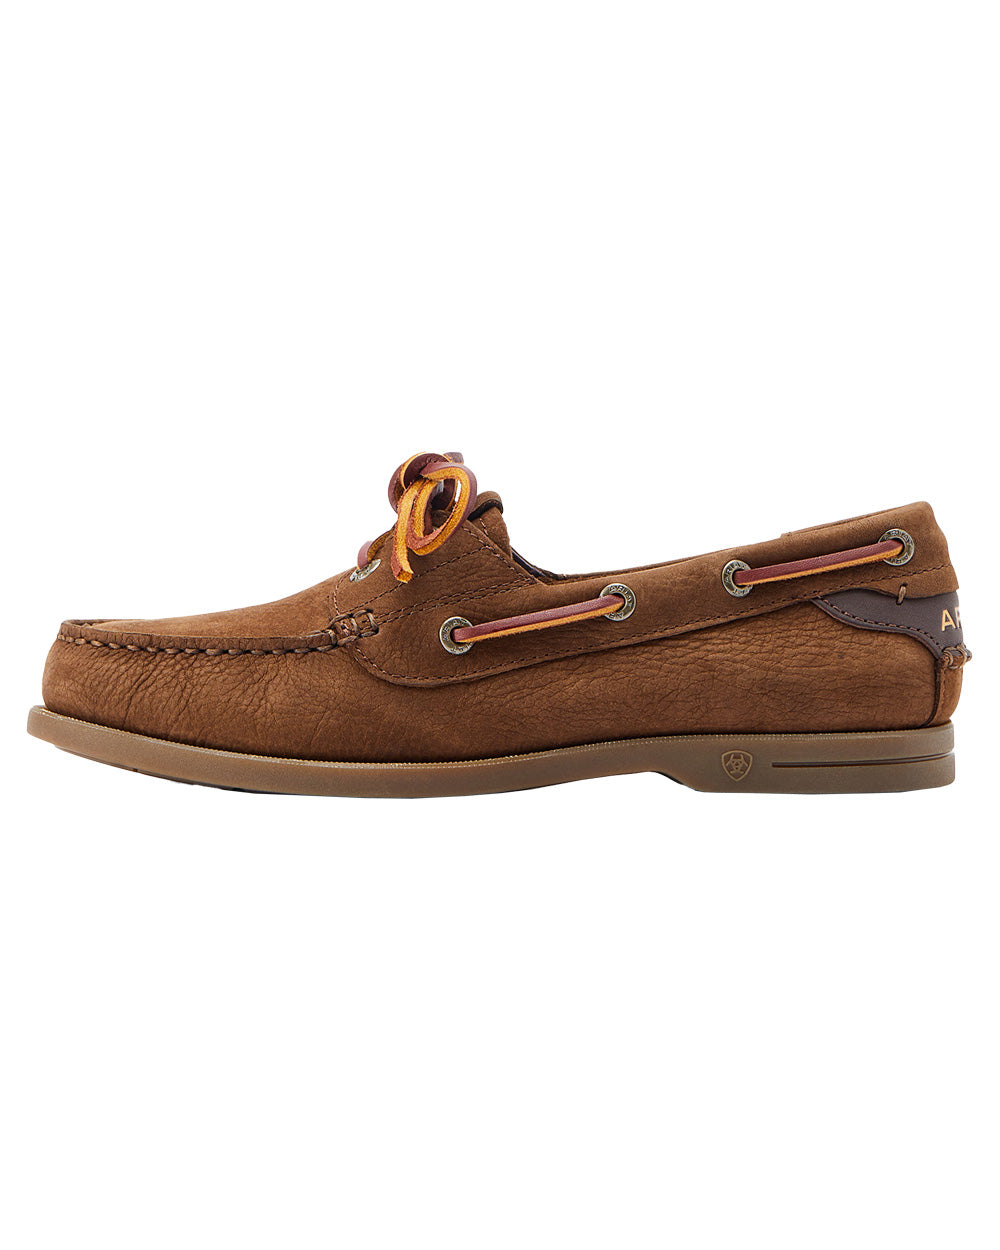 Chocolate Brown coloured Ariat Womens Antigua Boat Shoes on White background 